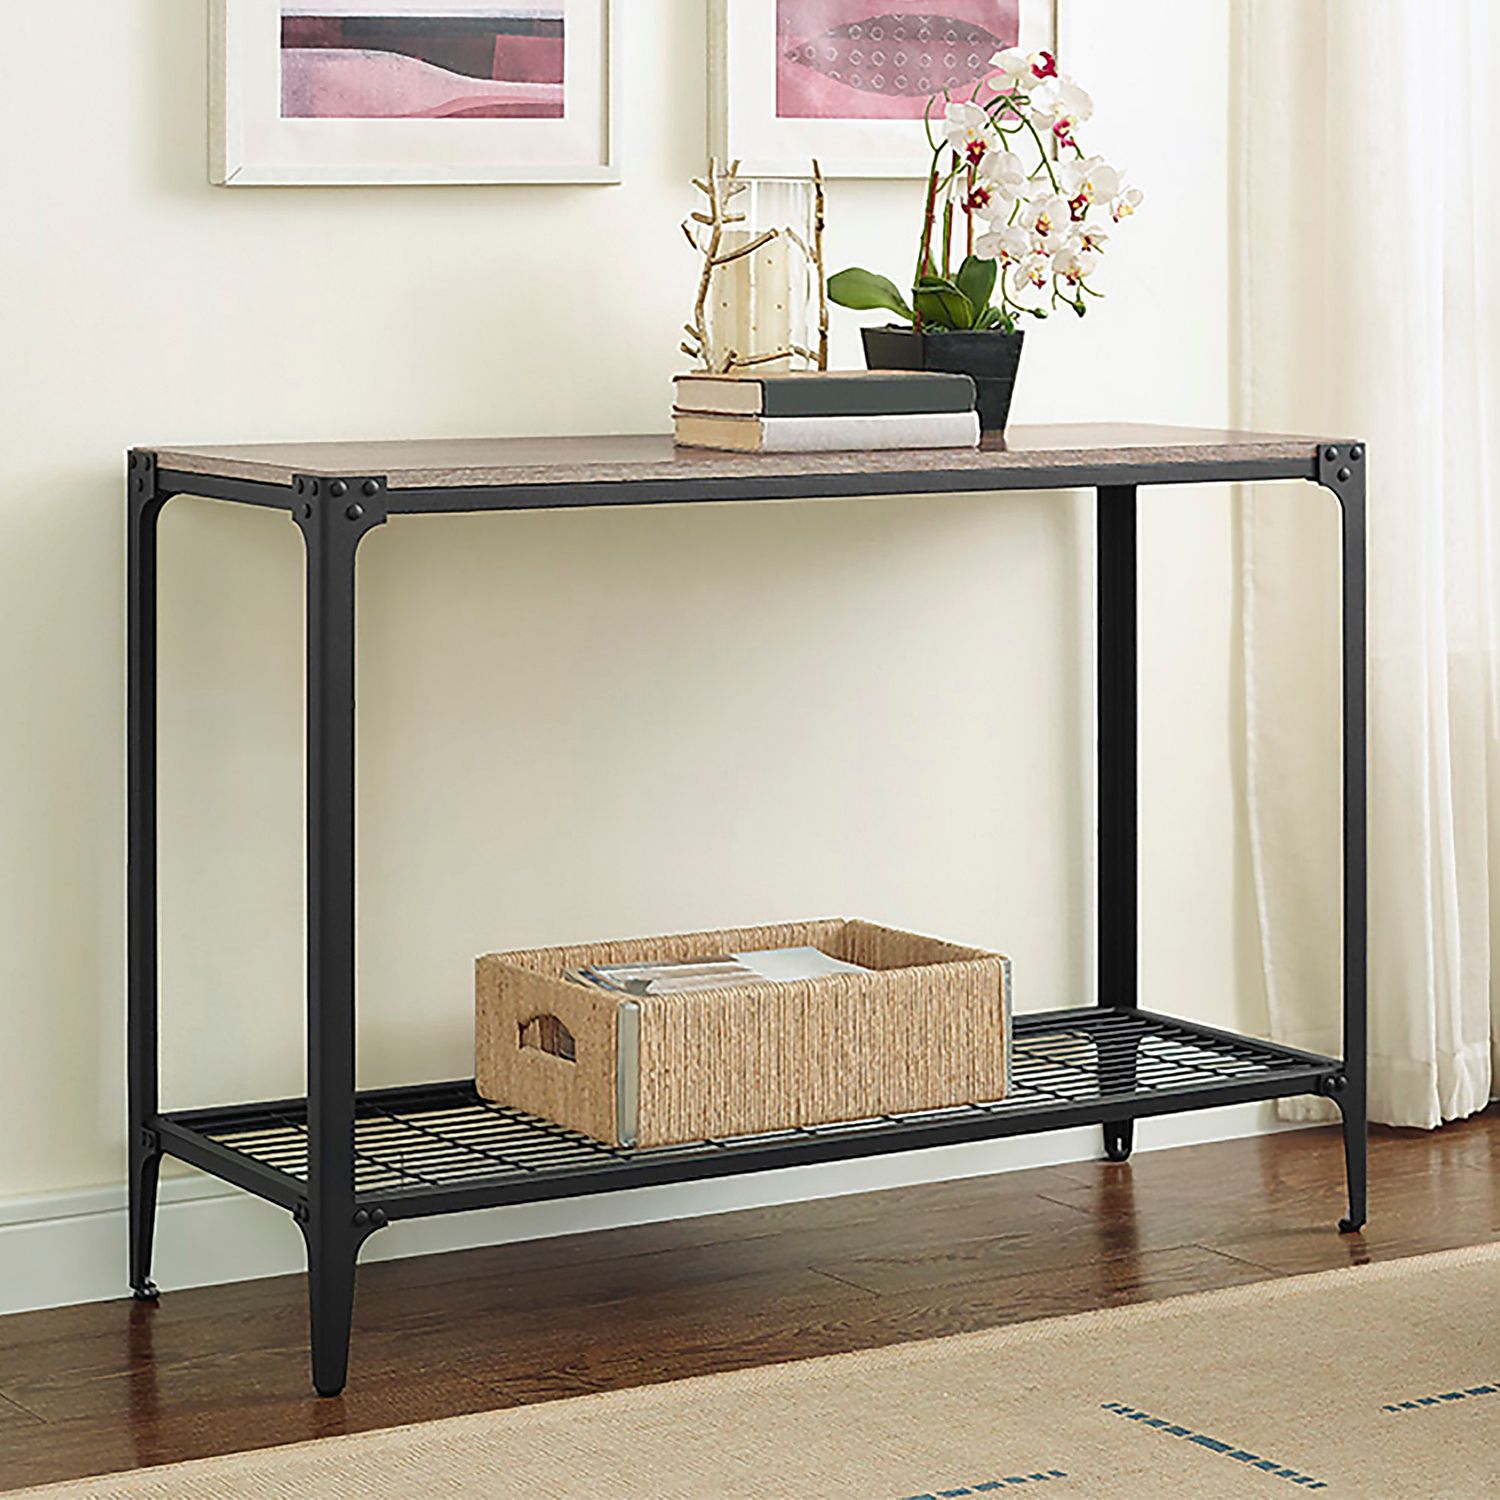 Angle Iron Rustic Console Table – Pier1 Imports For Metal Console Tables (Photo 4 of 20)